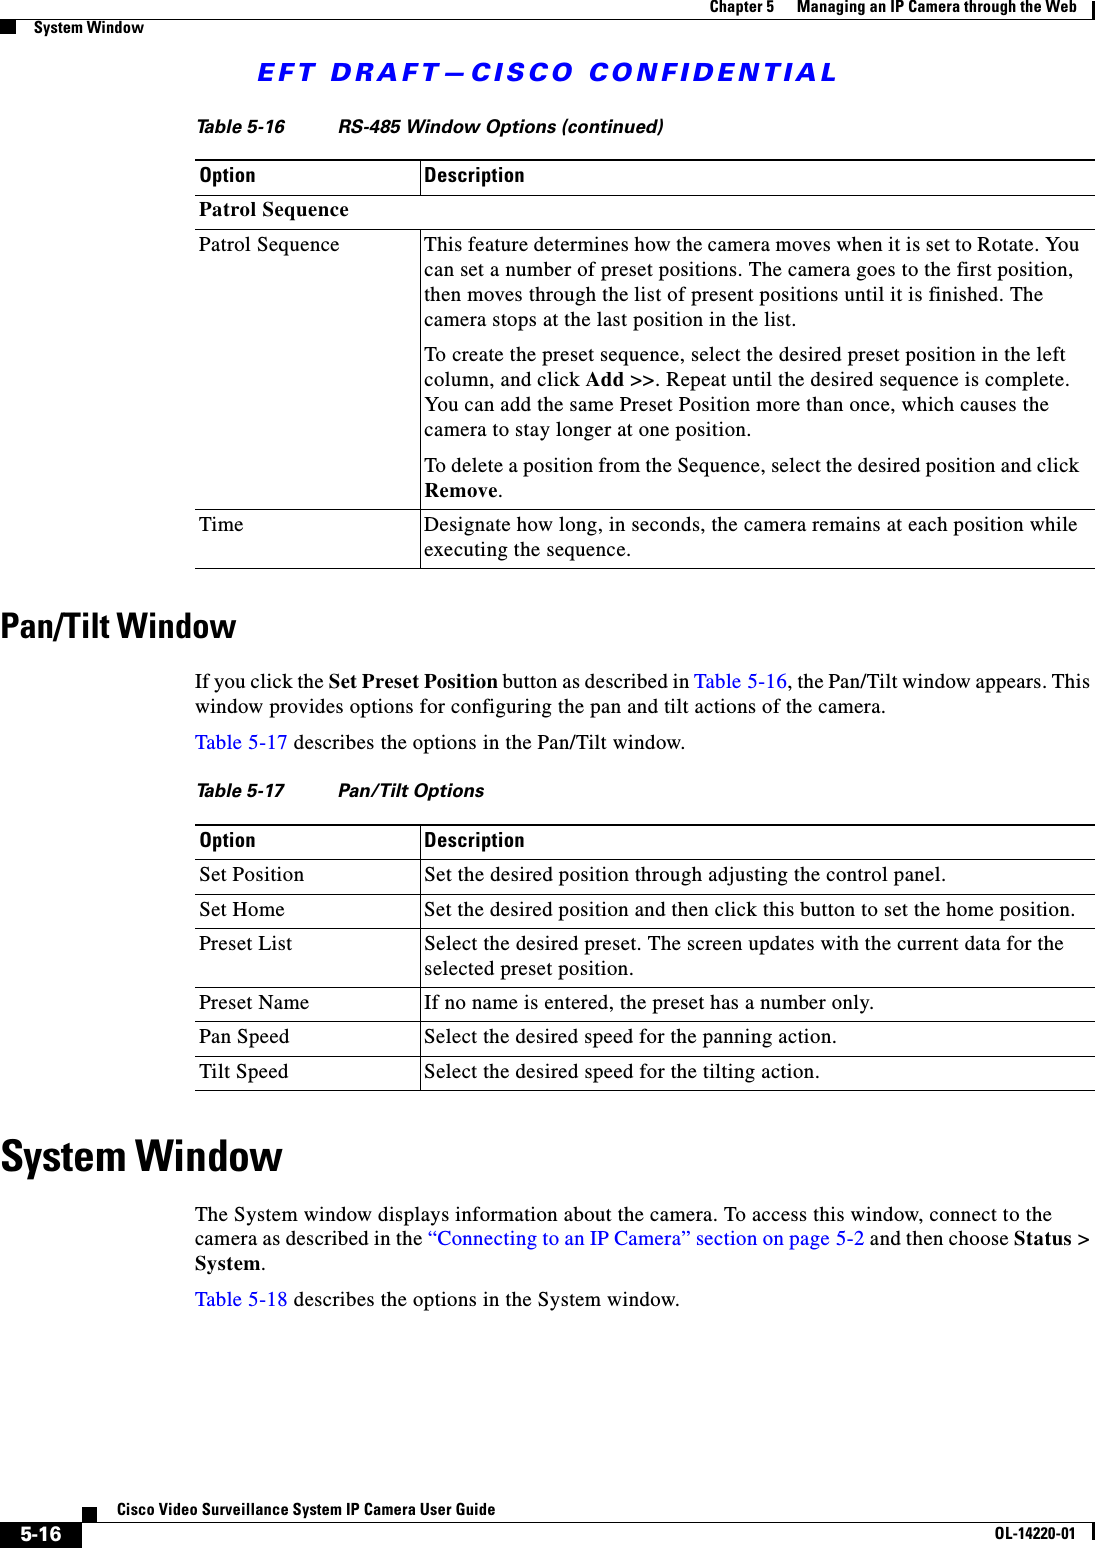 EFT DRAFT—CISCO CONFIDENTIAL5-16Cisco Video Surveillance System IP Camera User GuideOL-14220-01Chapter 5      Managing an IP Camera through the WebSystem WindowPan/Tilt WindowIf you click the Set Preset Position button as described in Table 5-16, the Pan/Tilt window appears. This window provides options for configuring the pan and tilt actions of the camera.Table 5-17 describes the options in the Pan/Tilt window.System WindowThe System window displays information about the camera. To access this window, connect to the camera as described in the “Connecting to an IP Camera” section on page 5-2 and then choose Status &gt; System.Table 5-18 describes the options in the System window.Patrol SequencePatrol Sequence This feature determines how the camera moves when it is set to Rotate. You can set a number of preset positions. The camera goes to the first position, then moves through the list of present positions until it is finished. The camera stops at the last position in the list. To create the preset sequence, select the desired preset position in the left column, and click Add &gt;&gt;. Repeat until the desired sequence is complete. You can add the same Preset Position more than once, which causes the camera to stay longer at one position. To delete a position from the Sequence, select the desired position and click Remove.Time Designate how long, in seconds, the camera remains at each position while executing the sequence.Table 5-16 RS-485 Window Options (continued)Option DescriptionTable 5-17 Pan/Tilt OptionsOption DescriptionSet Position Set the desired position through adjusting the control panel.Set Home Set the desired position and then click this button to set the home position.Preset List Select the desired preset. The screen updates with the current data for the selected preset position.Preset Name If no name is entered, the preset has a number only. Pan Speed Select the desired speed for the panning action.Tilt Speed Select the desired speed for the tilting action.